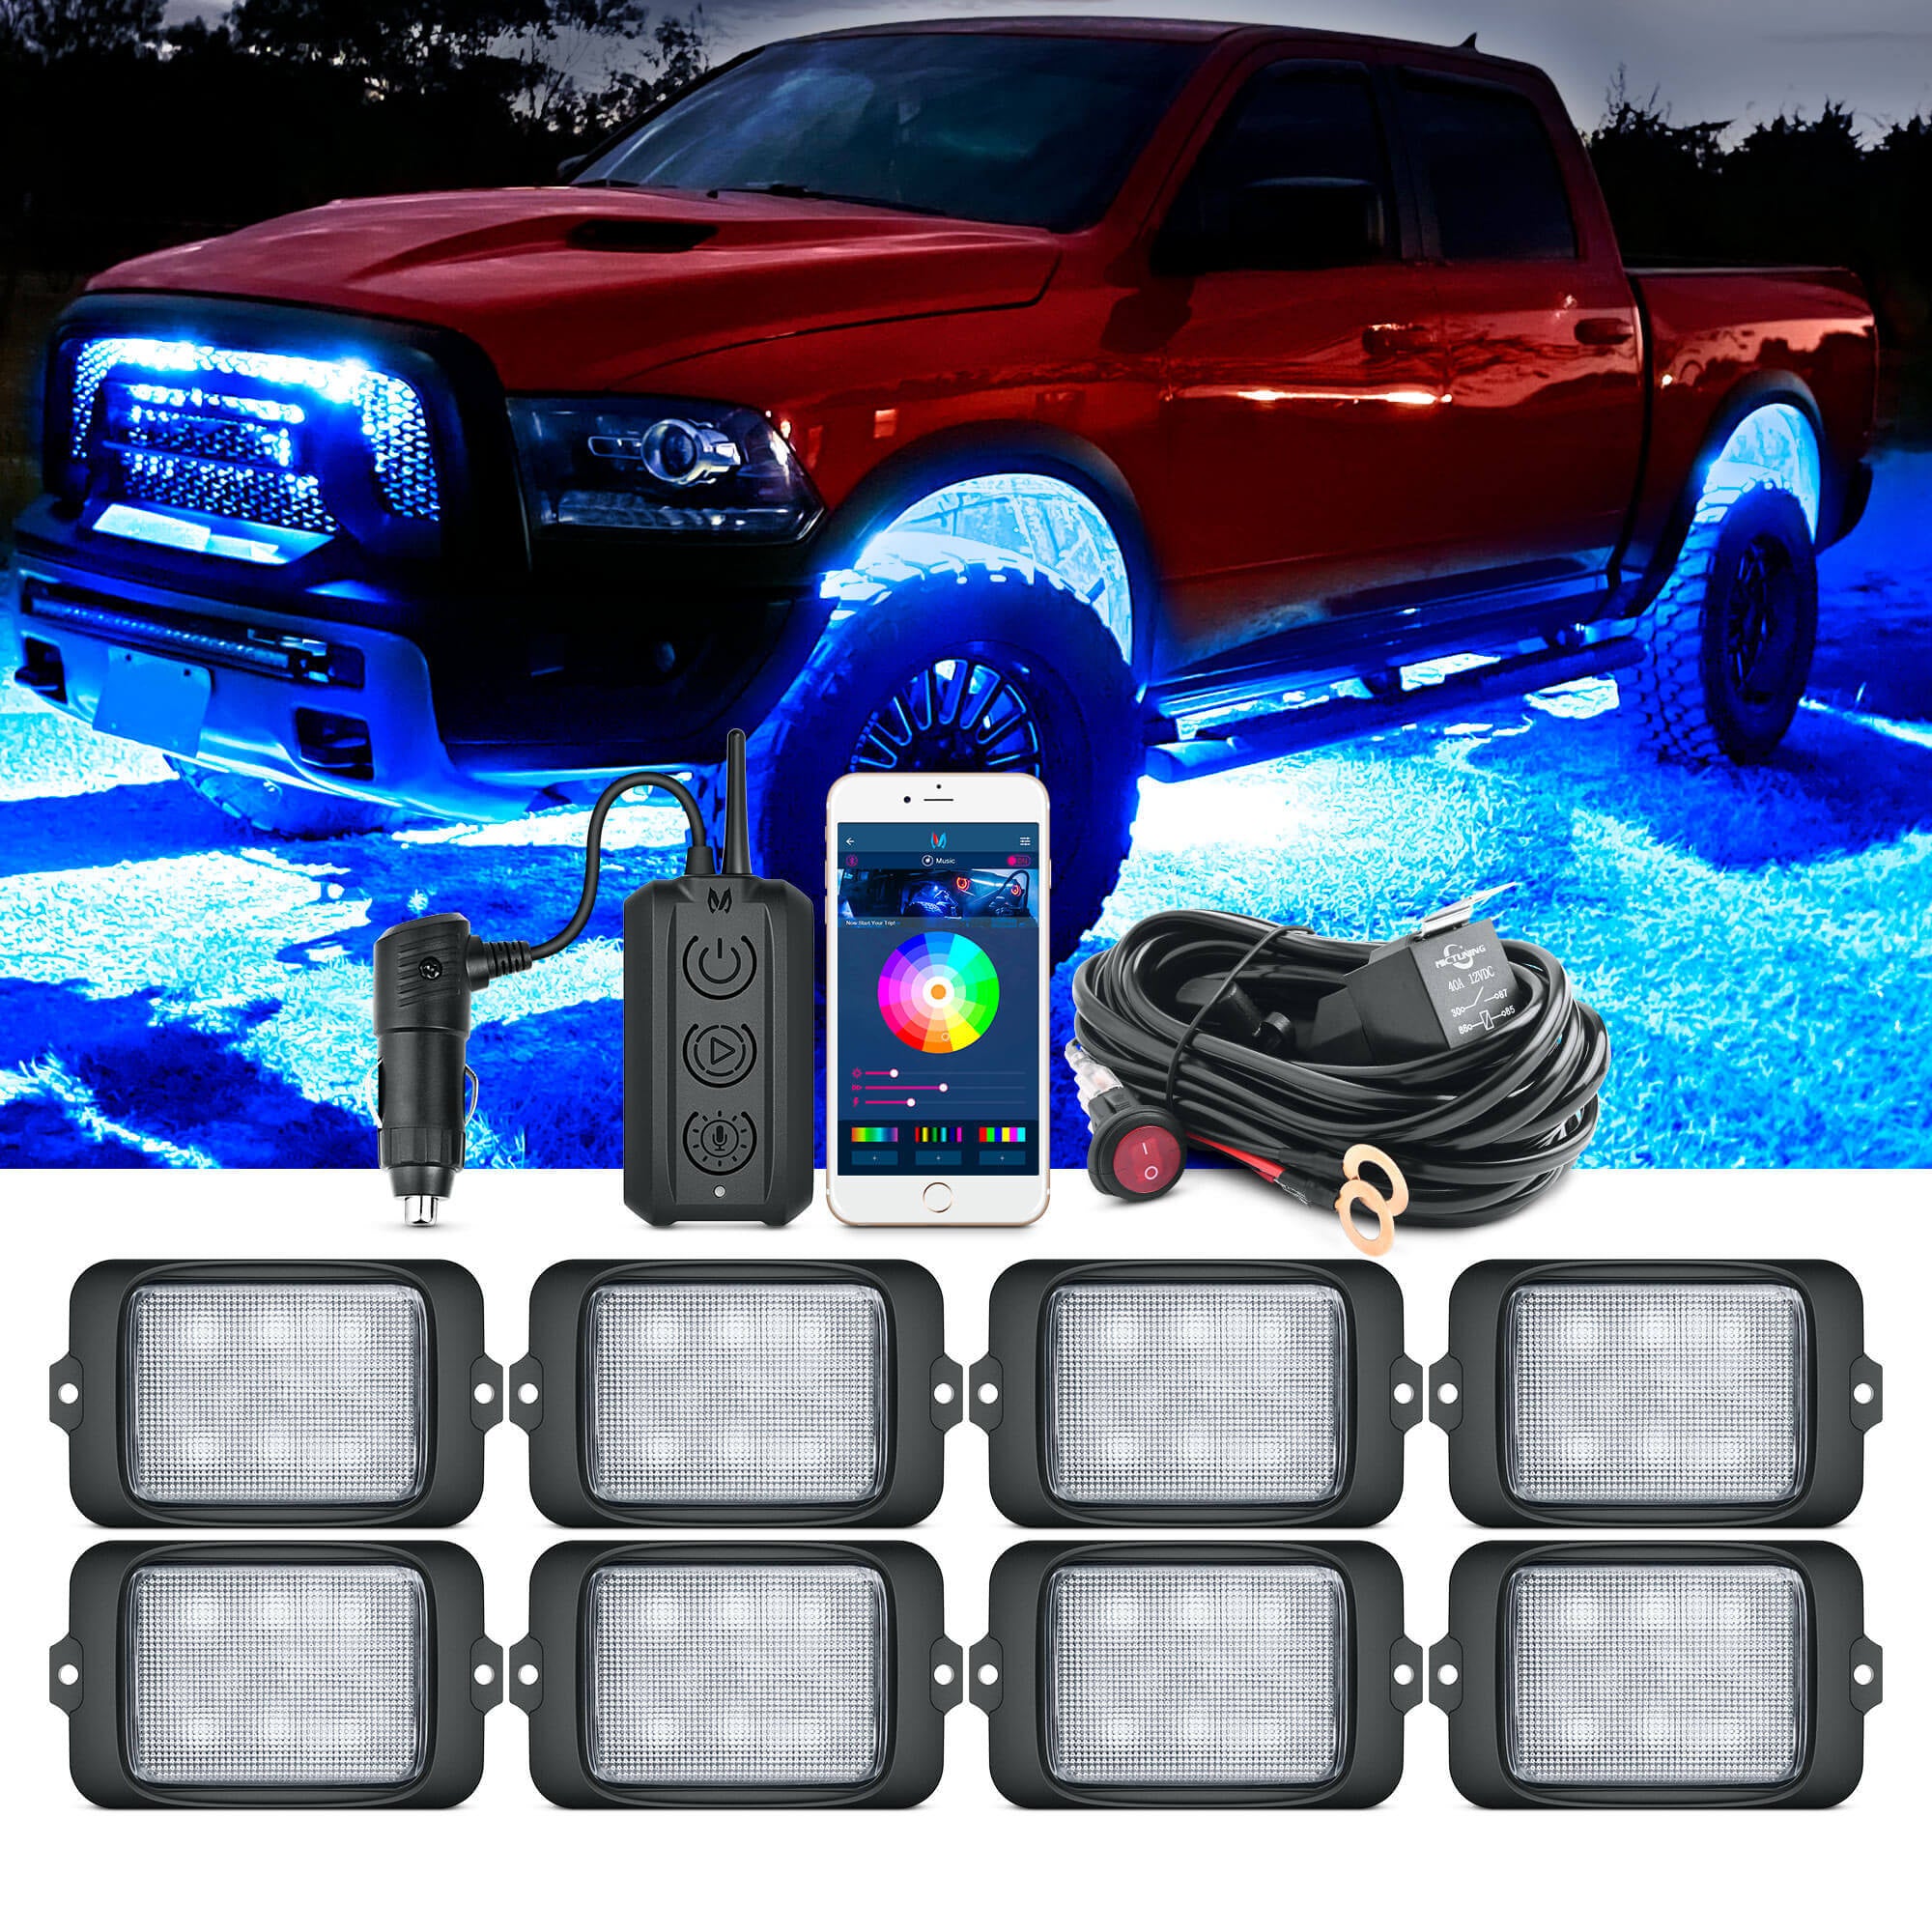 C3 Extensible RGBW LED Rock Lights - 8 Pods Wireless Control Multi-Color Neon Underglow Lights